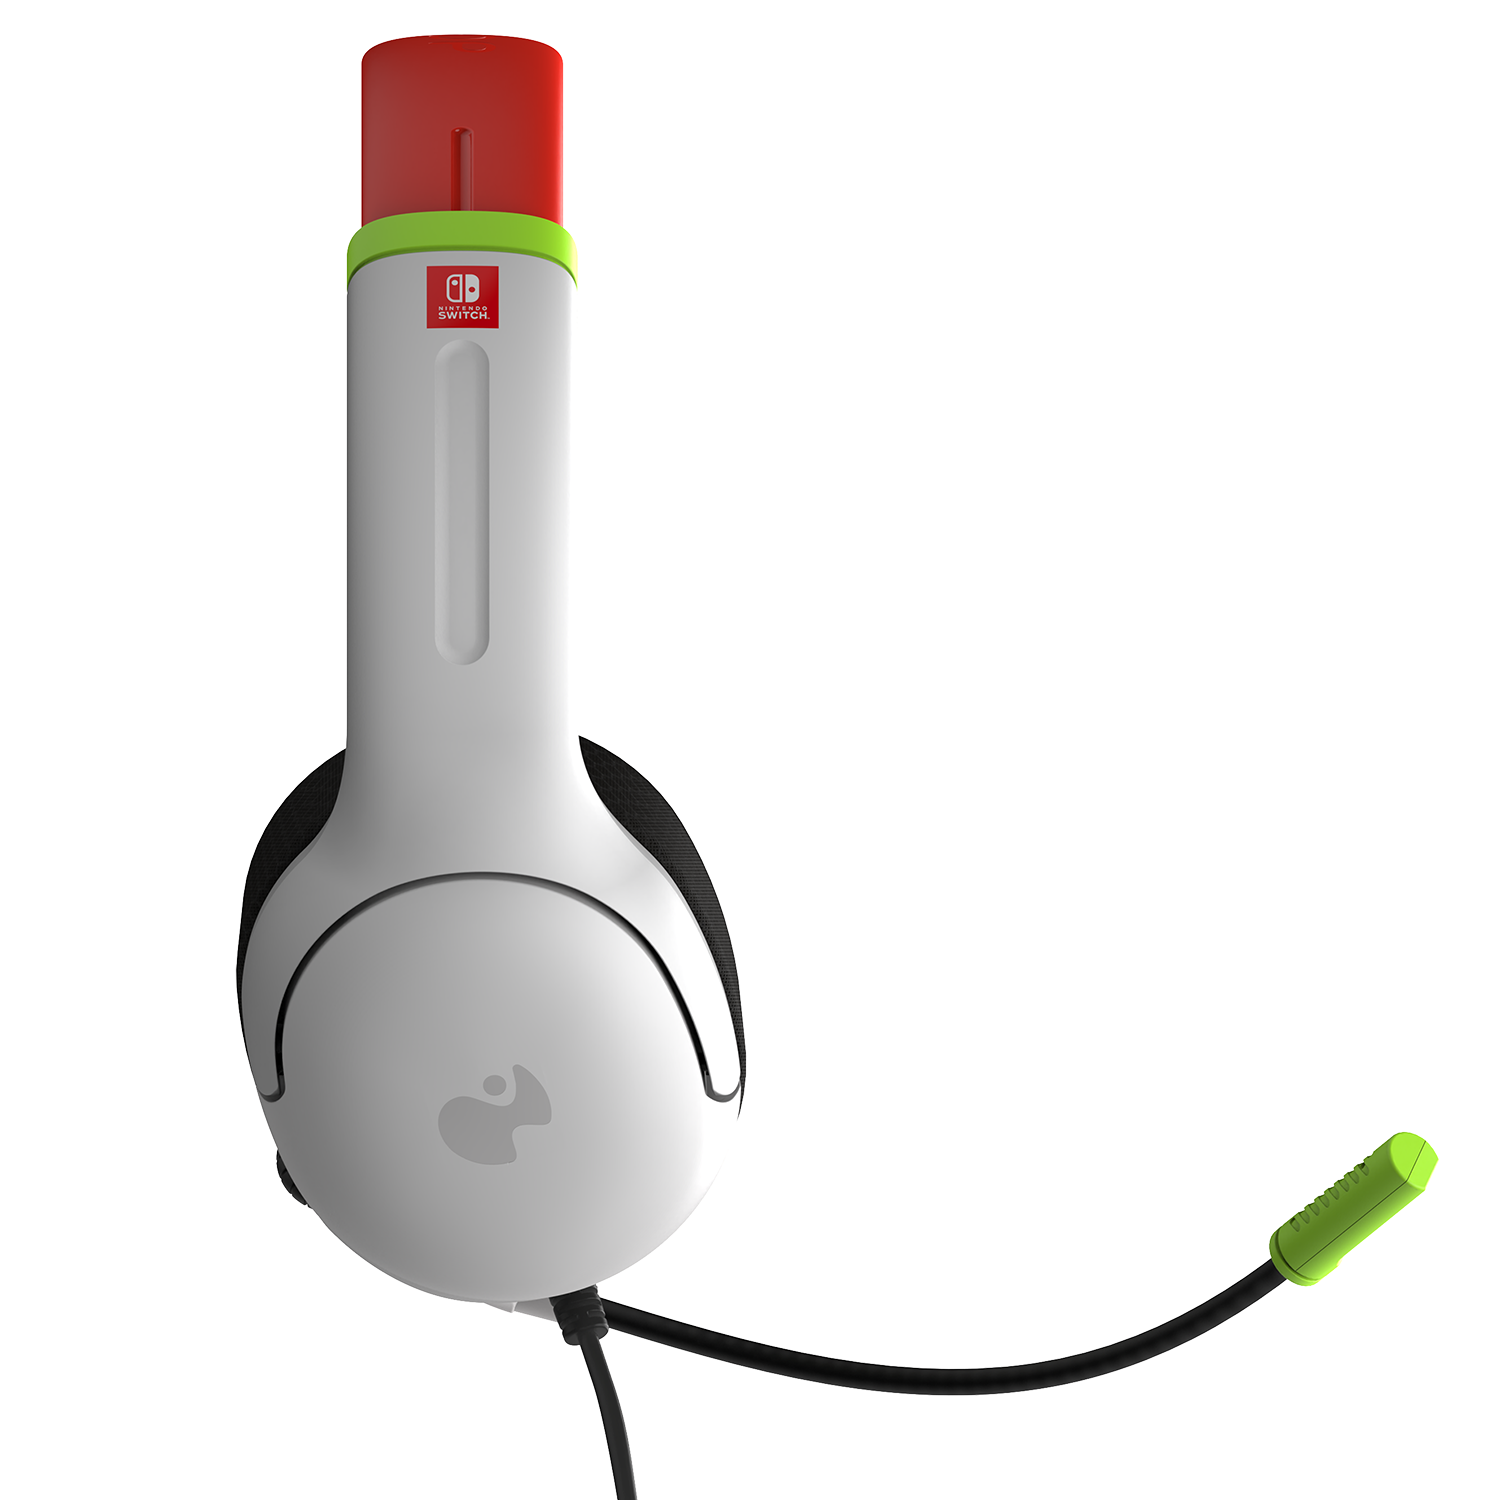 PDP AIRLITE Wired Headset: Neon Pop for Nintendo Switch, Nintendo Switch -  OLED Model 